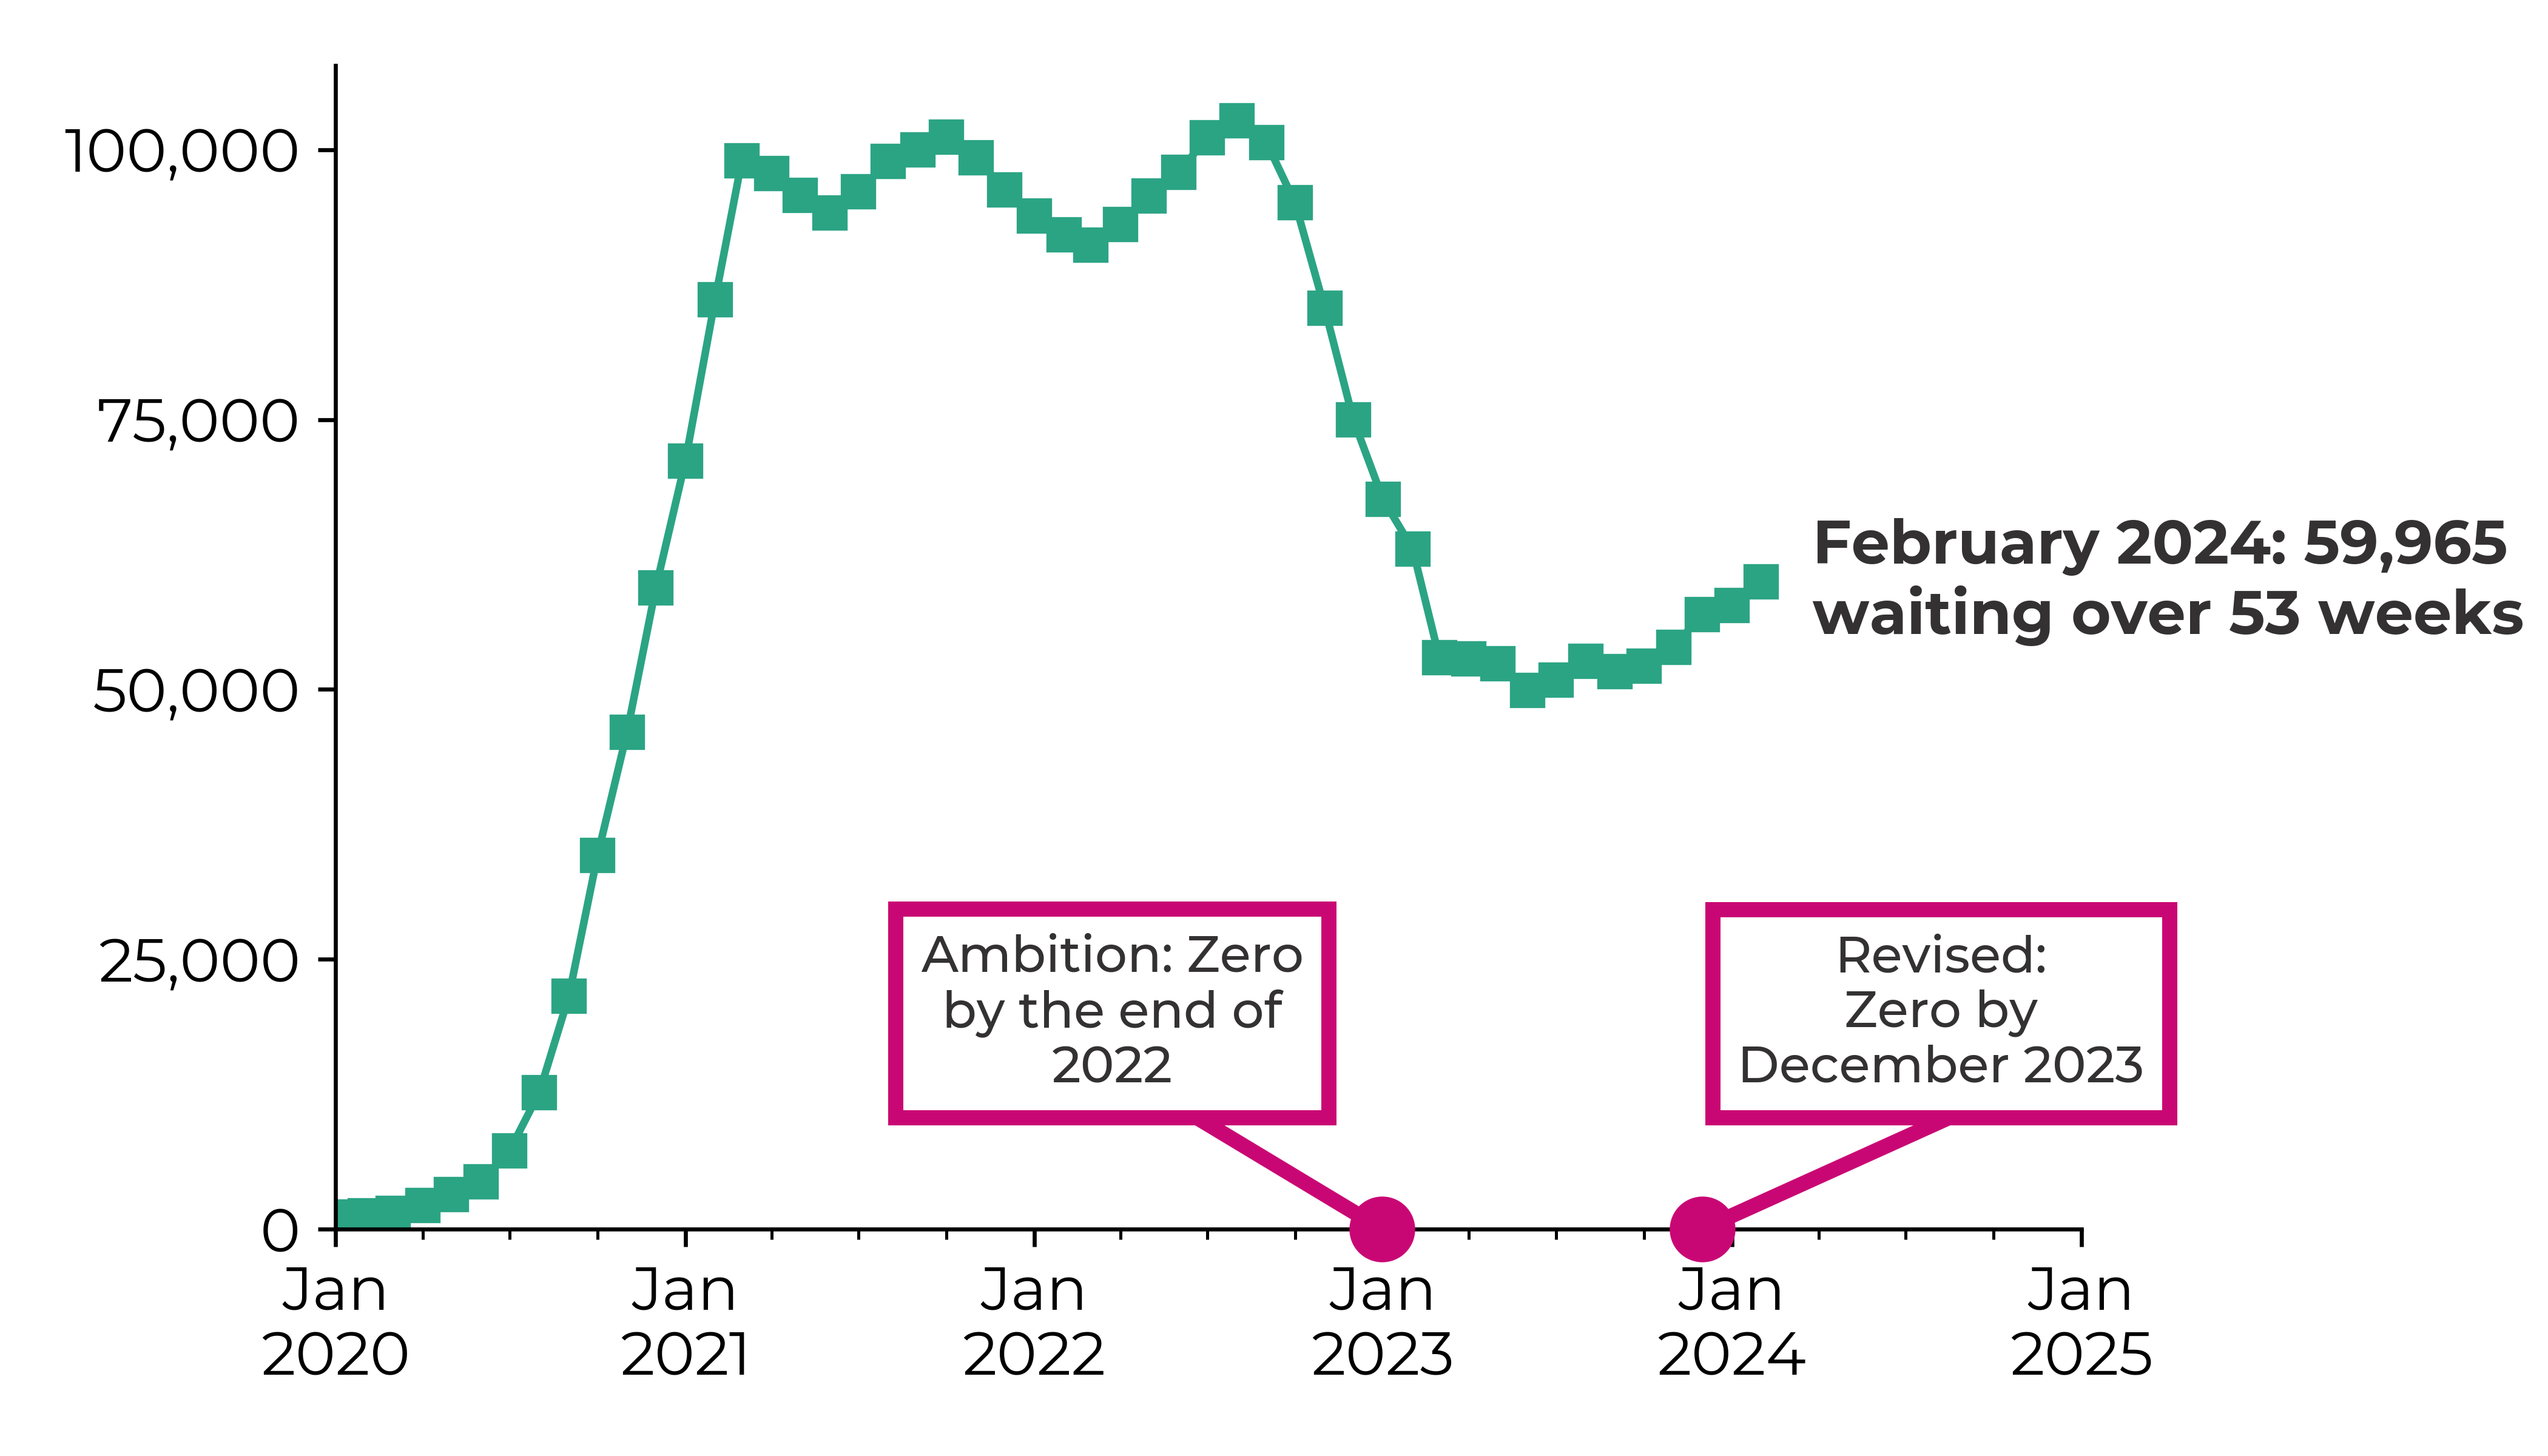 Graph showing the number of patient pathways waiting over 53 weeks increased from 1,115 in January 2020 to 57,754 in January 2024. Against an ambition of zero by the end of 2022.